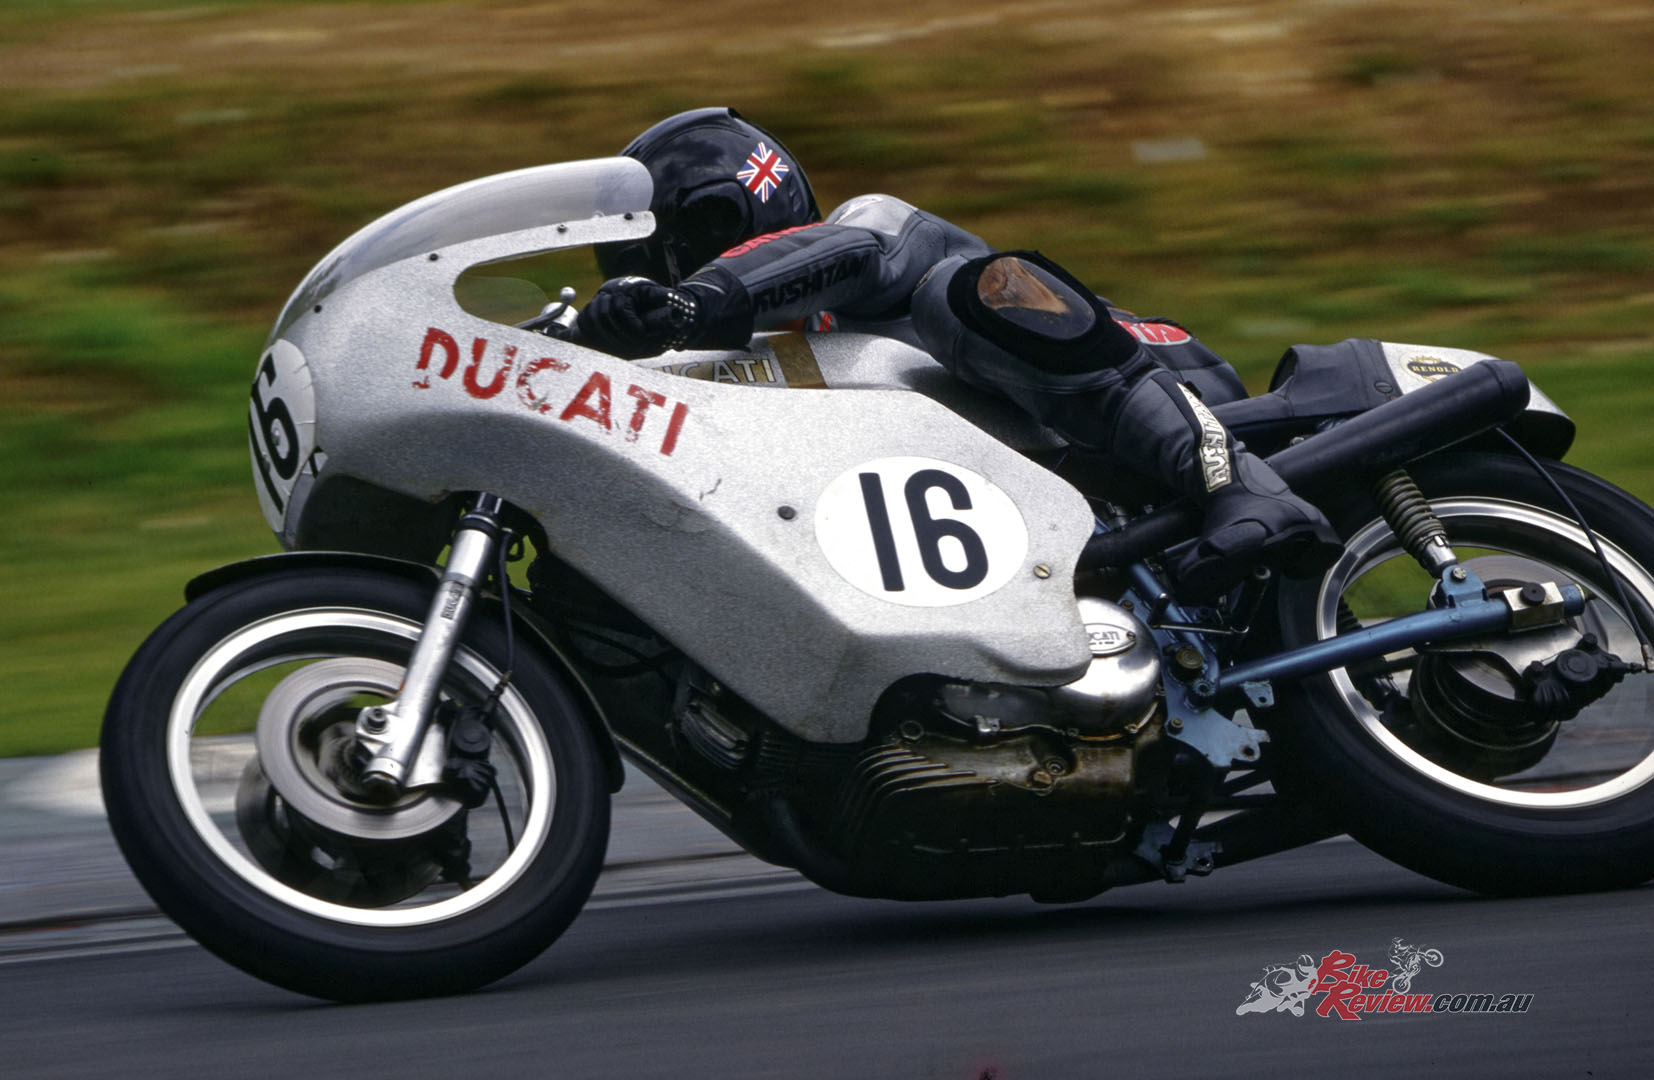 "Out on the Brands short circuit, it was a trip down memory lane, and I immediately appreciated the fine engineering that Ducati’s late design guru, Fabio Taglioni, invested in producing this motorcycle engine."